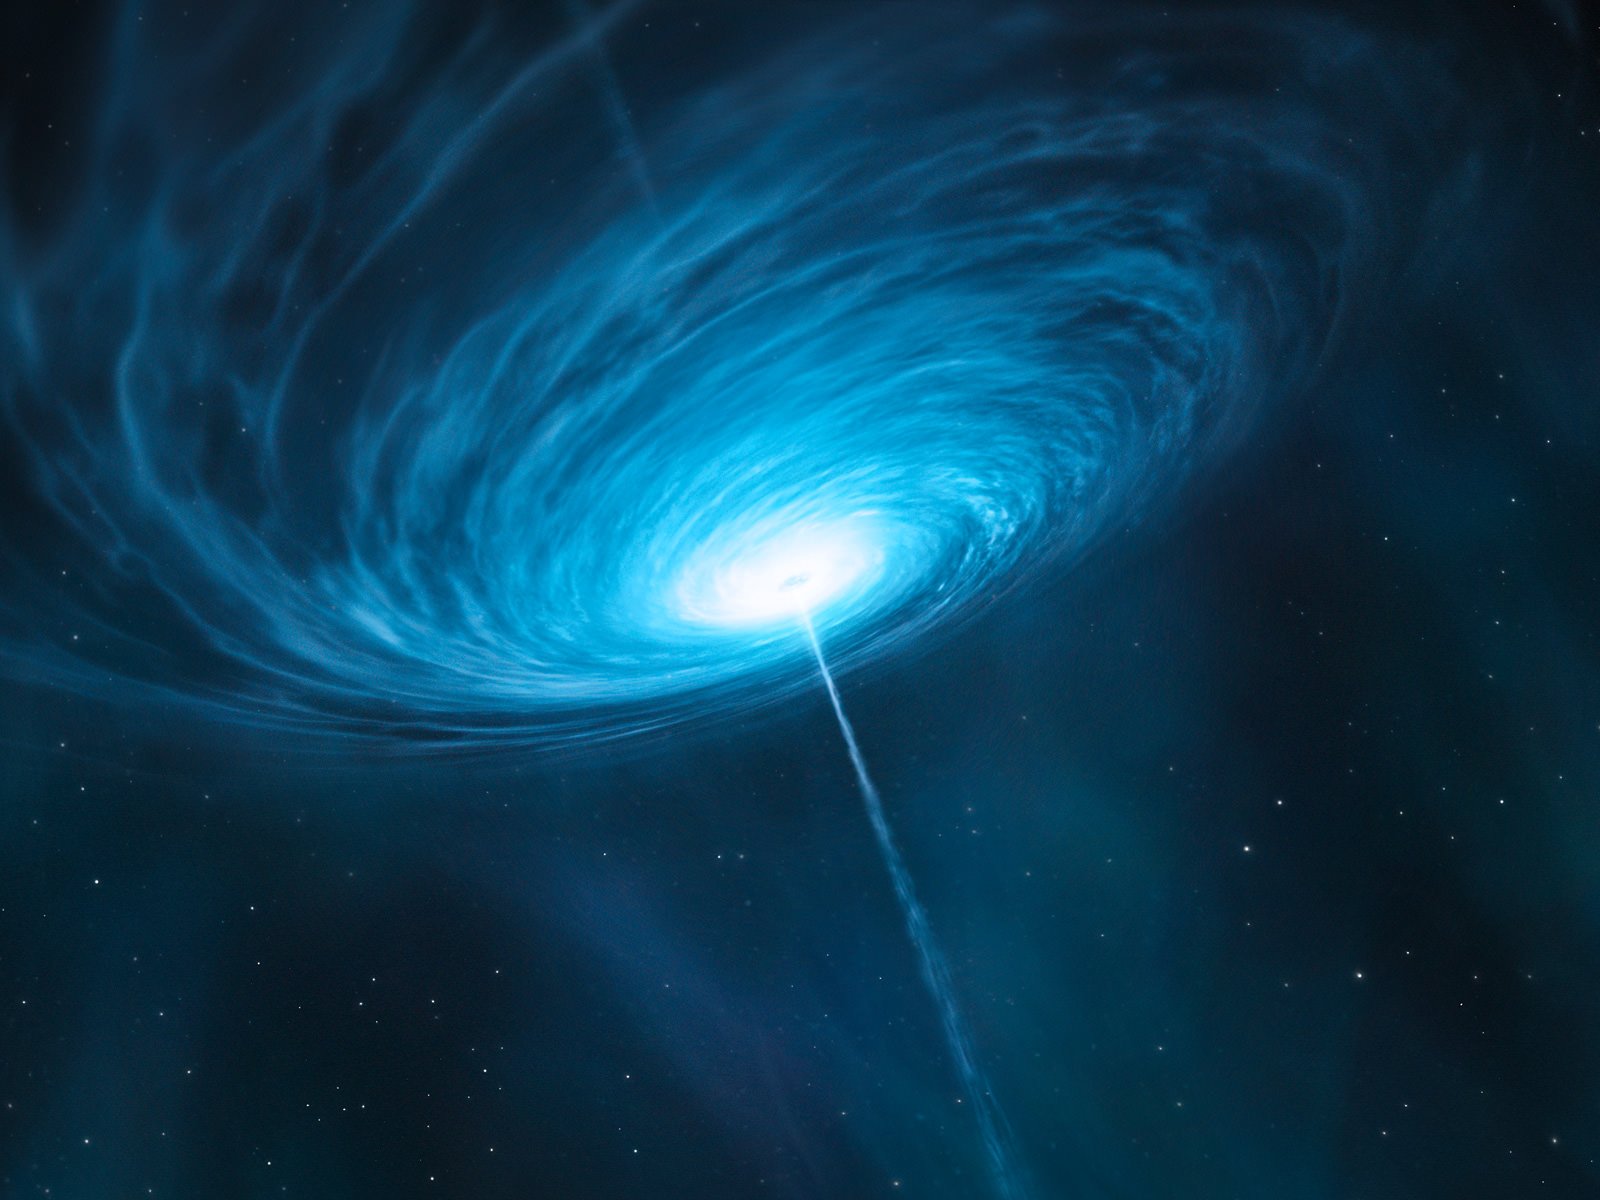 Twitter-এ Gaston Giribet: The blue giant TON a distant quasar of Canes Venatici constellation. It's the biggest black hole ever detected: 6.6 10^10 solar masses. Causing emission of 10^40 Watts, it